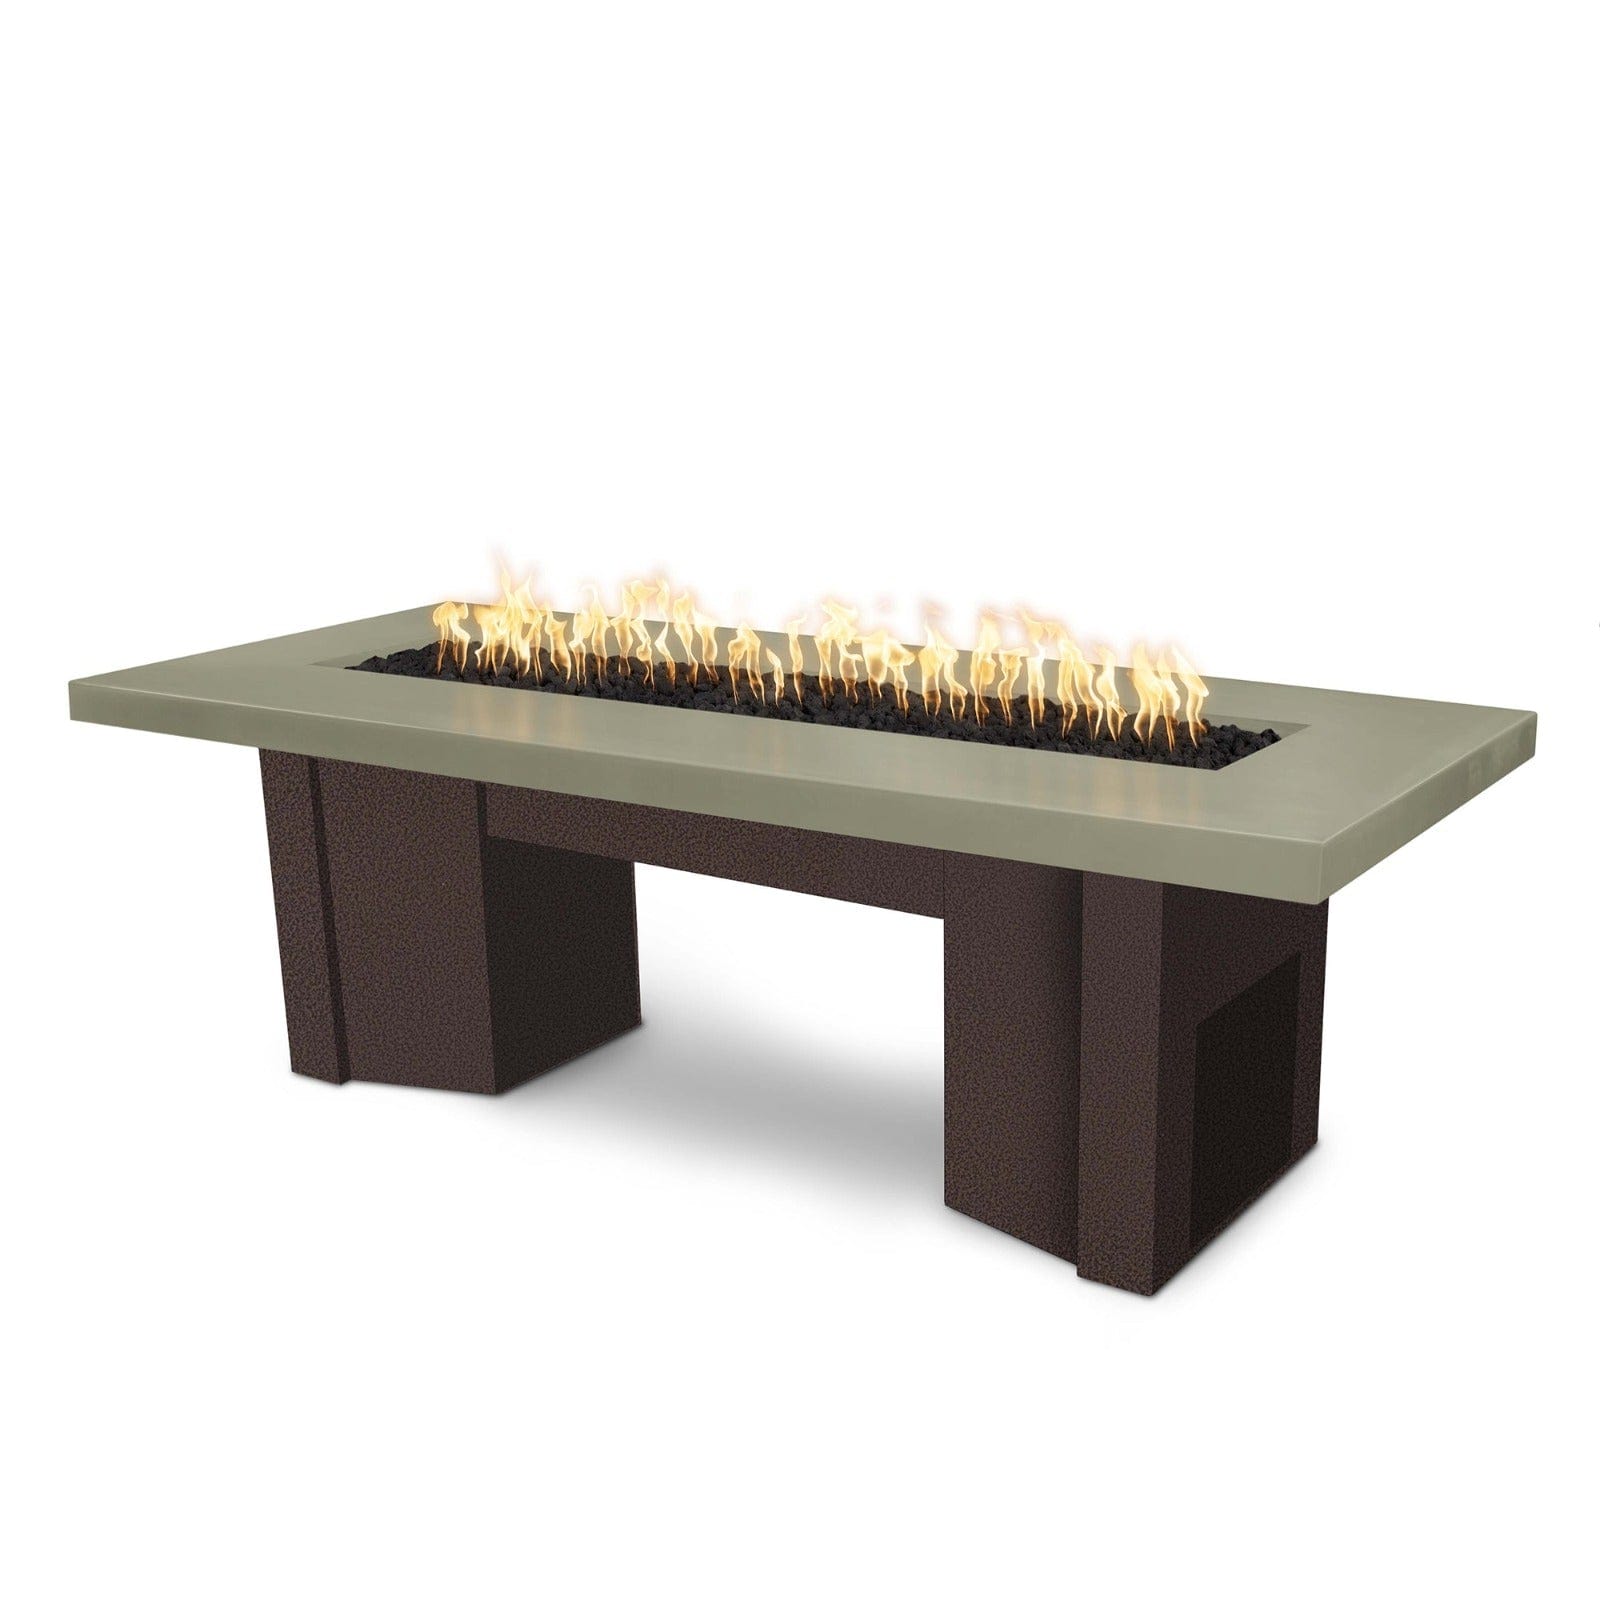 The Outdoor Plus Fire Features Ash (-ASH) / Copper Vein Powder Coated Steel (-CPV) The Outdoor Plus 78" Alameda Fire Table Smooth Concrete in Liquid Propane - Match Lit / OPT-ALMGFRC78-LP